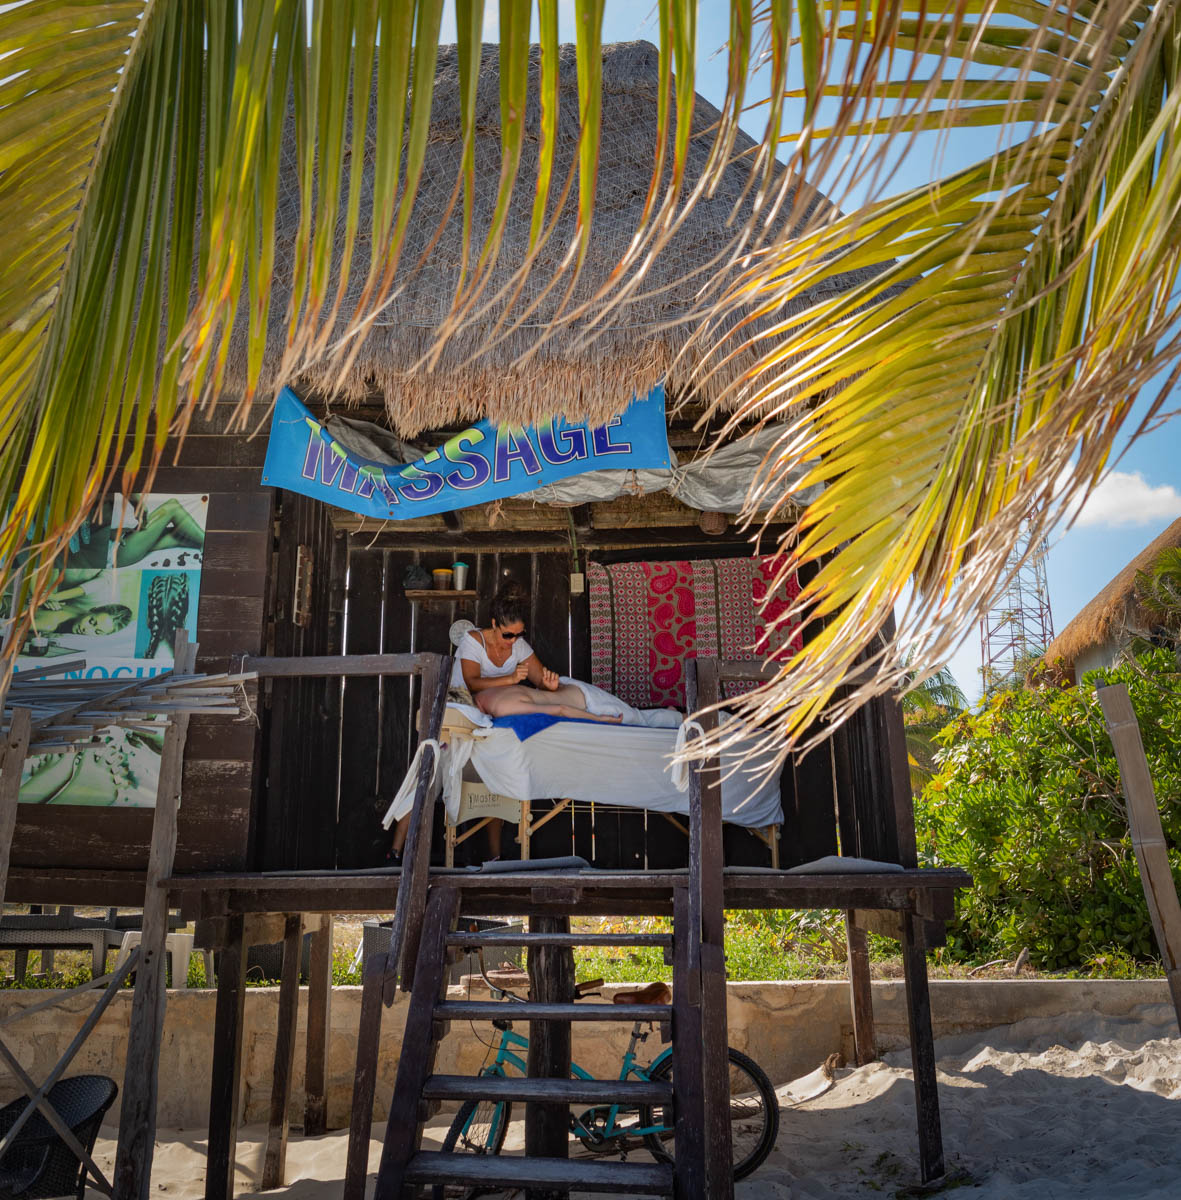 A woman gets a massage in a hut on the beach in Puerto Morelos, Mexico.